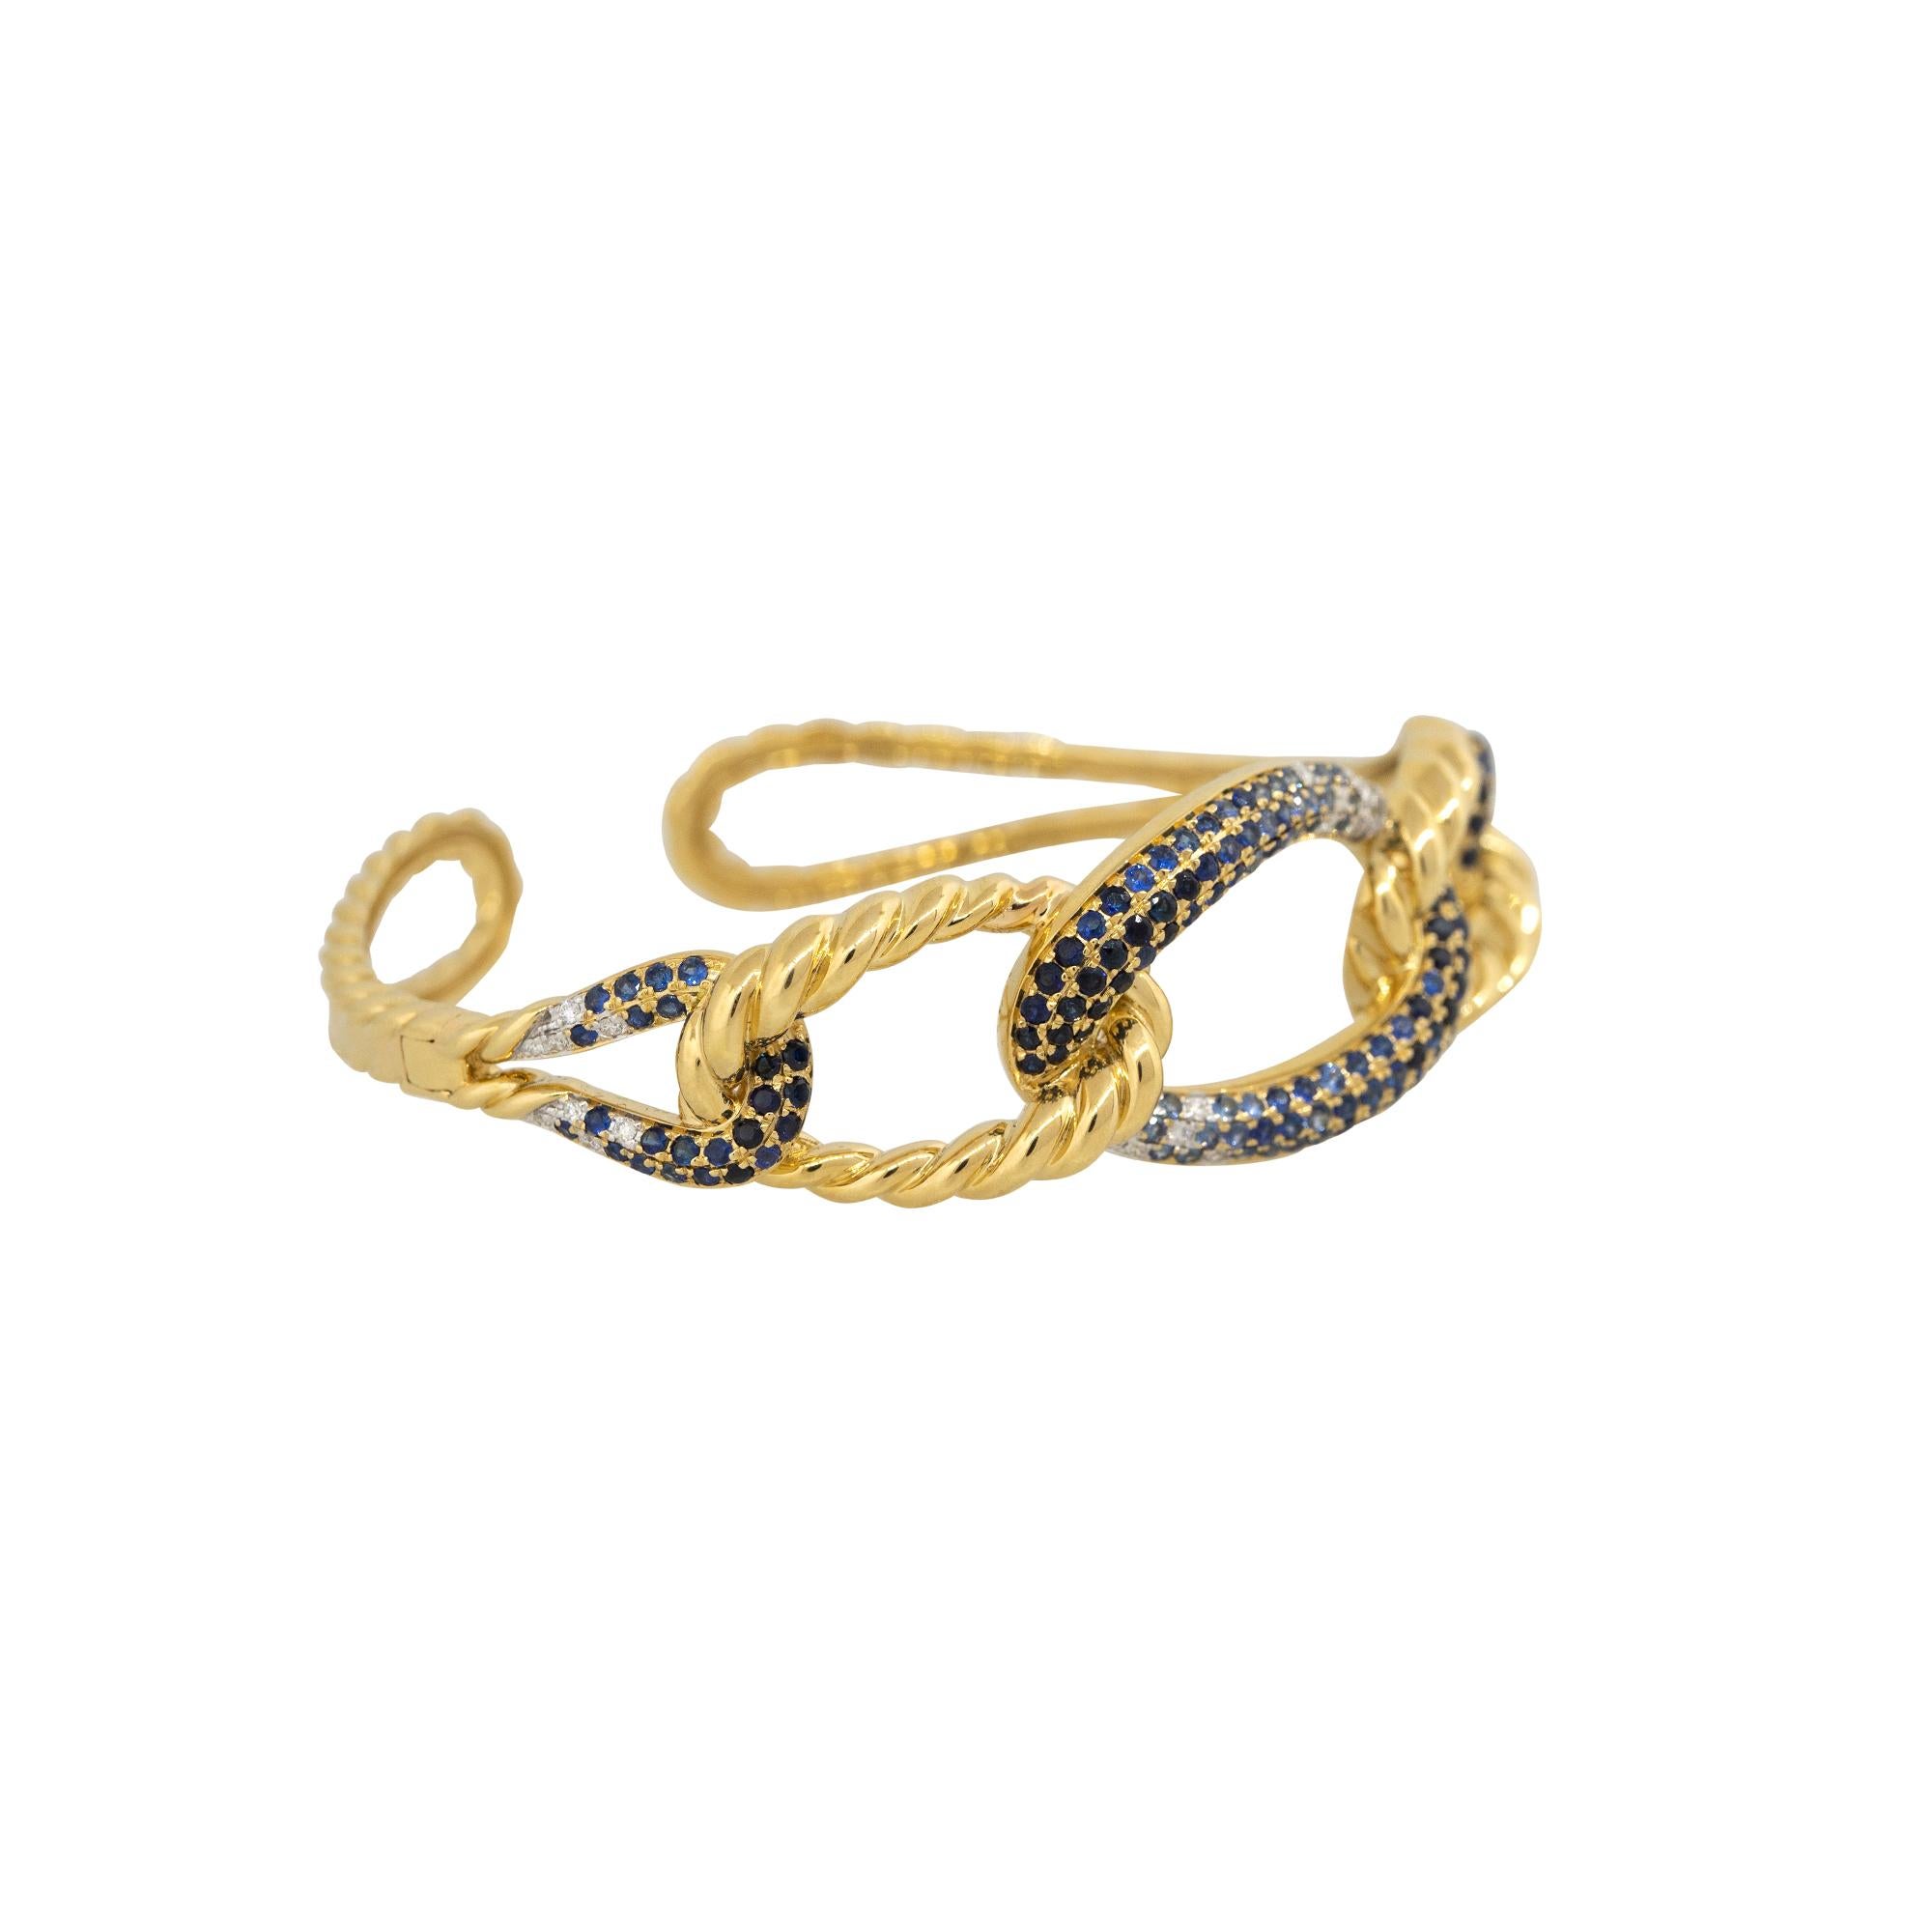 18k Yellow Gold 2.11ct Sapphire and 0.27ct Diamond Link Bracelet
Material: 18K Yellow Gold
Gemstone/Diamond Details: There are approximately 2.11 Carats of Round Brilliant Cut Sapphires and approximately 0.27 carats of Round Brilliant Cut Diamonds.